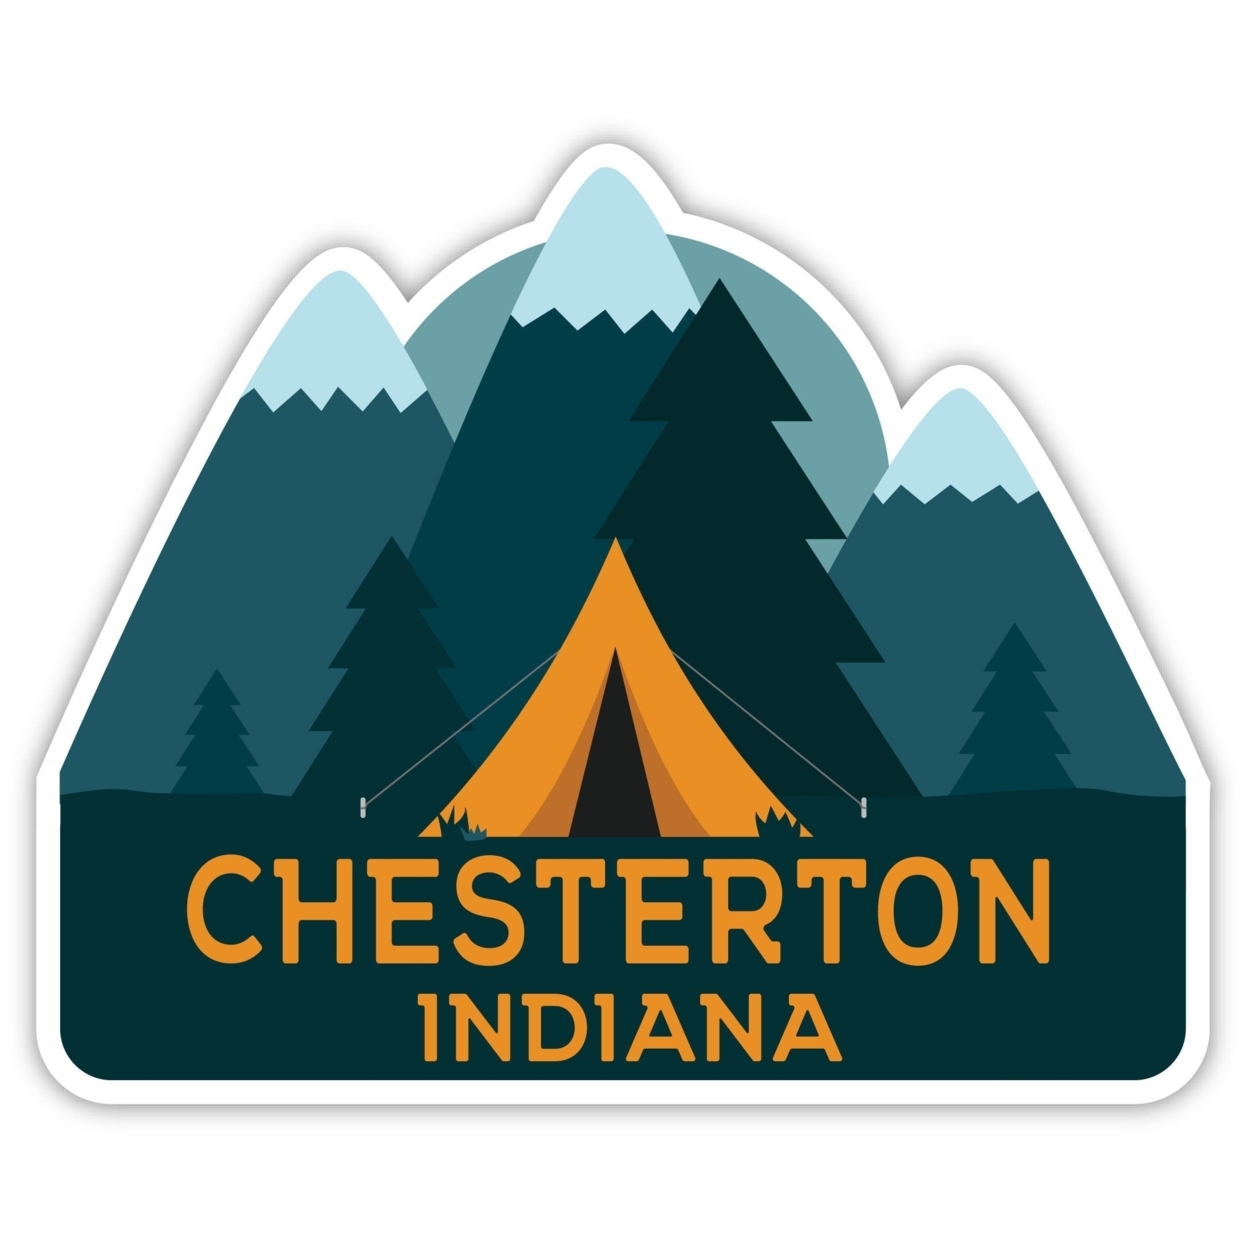 Chesterton Indiana Souvenir Decorative Stickers (Choose Theme And Size) - 4-Pack, 10-Inch, Bear